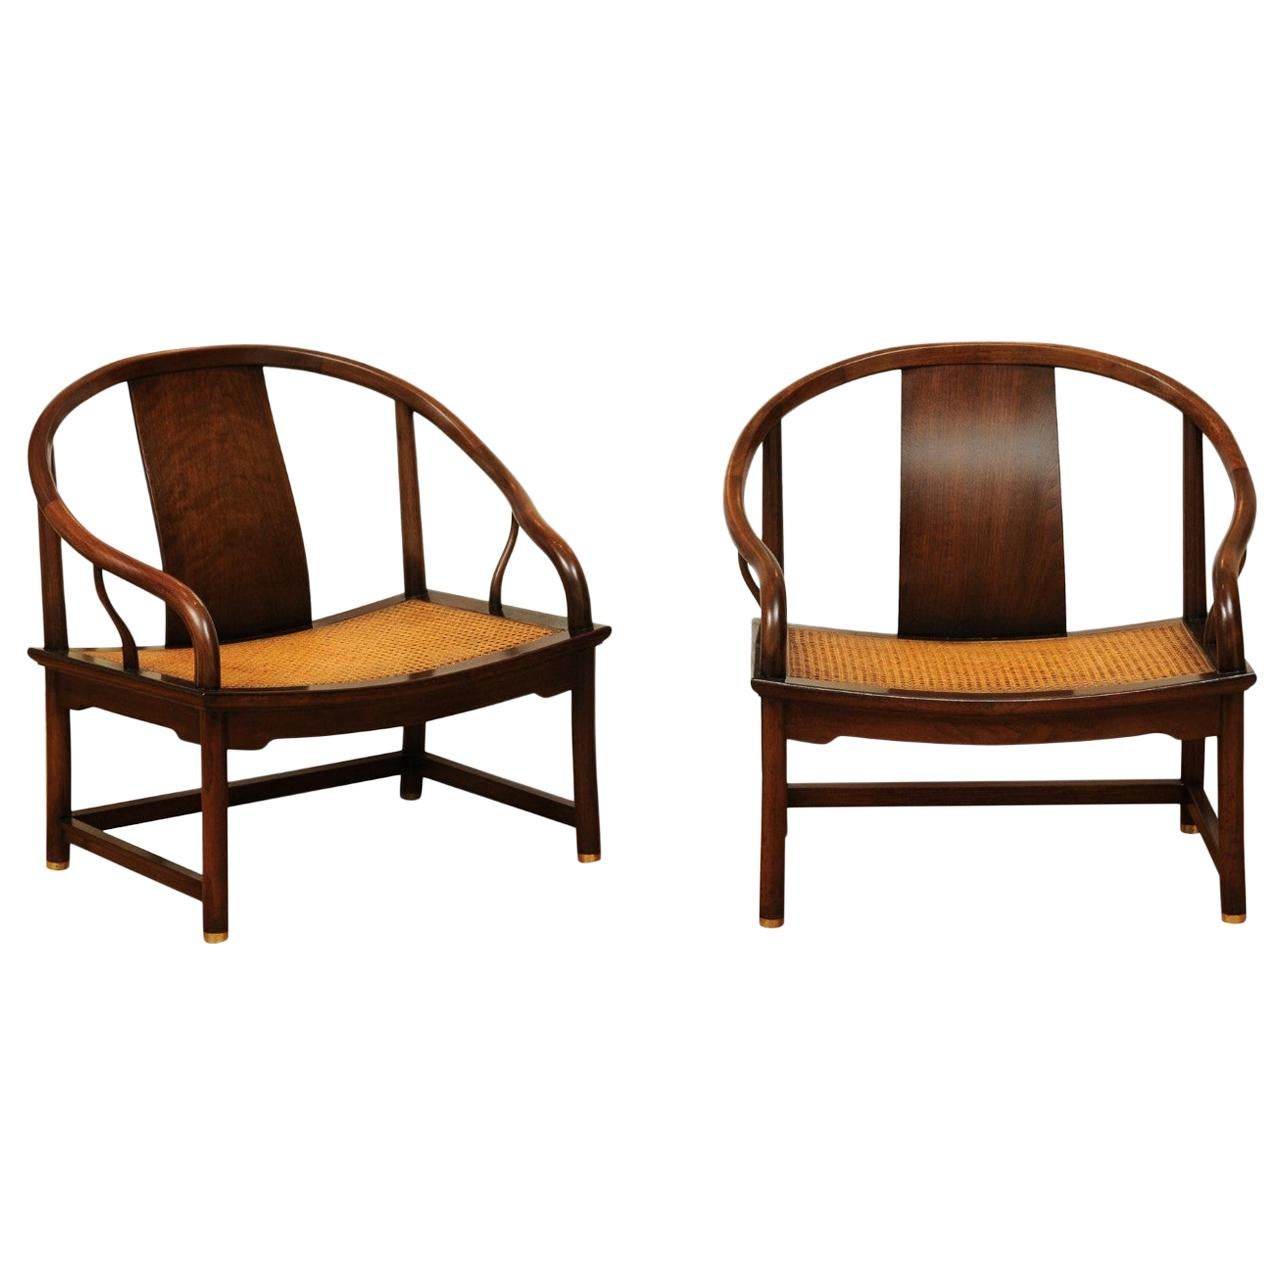 Stunning Restored Pair of Walnut Cane Loungers by Michael Taylor, circa 1960 For Sale